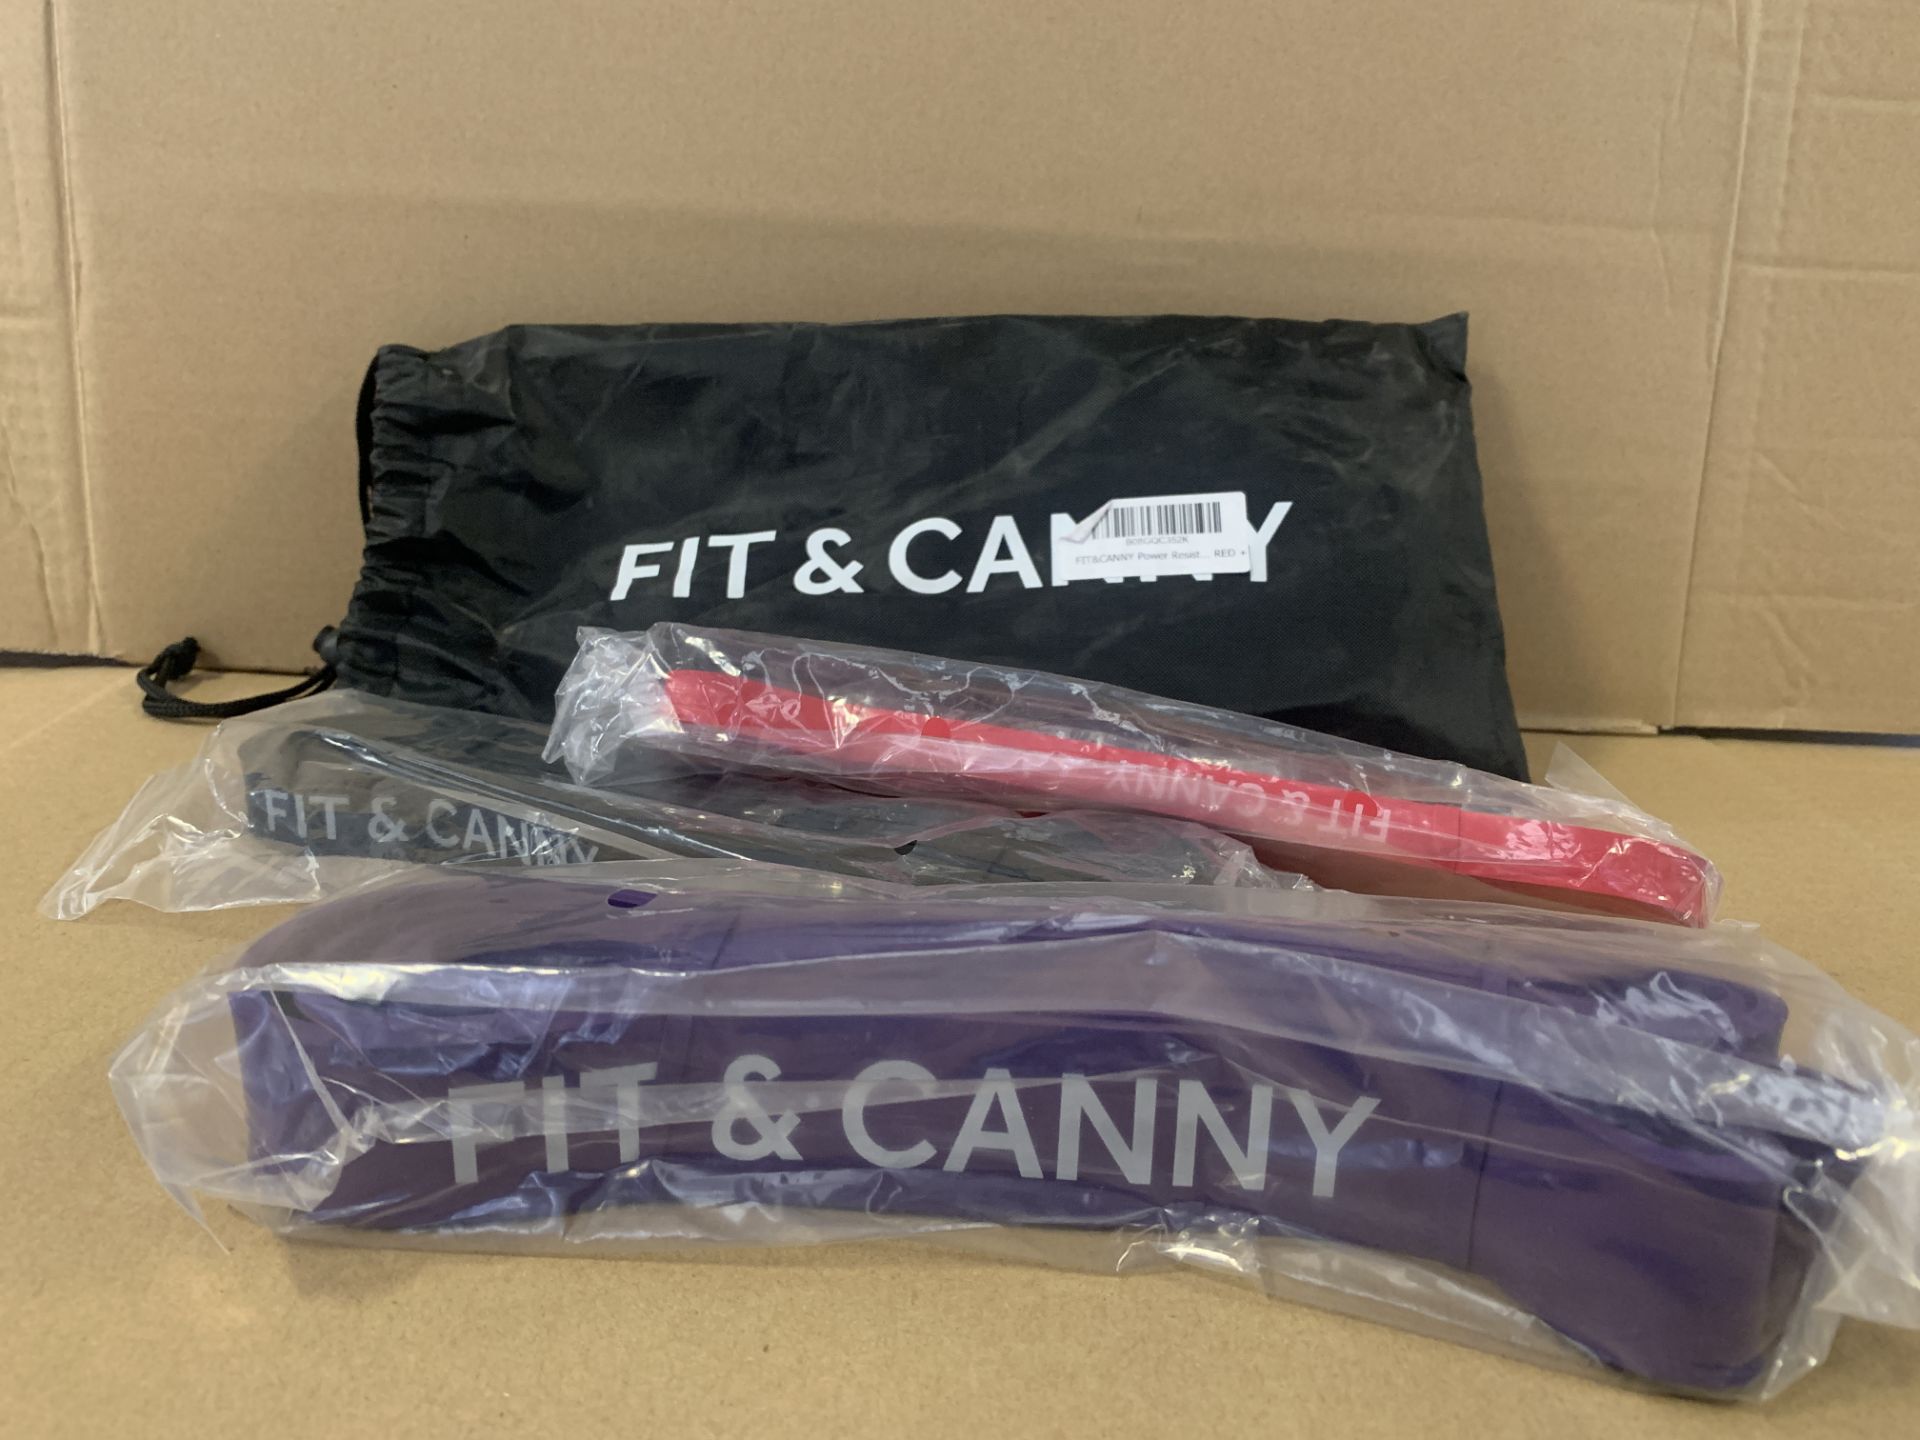 20 X BRAND NEW FIT AND CANNY RESISTANCE BANDS (COLOURS MAY VARY) S1-4